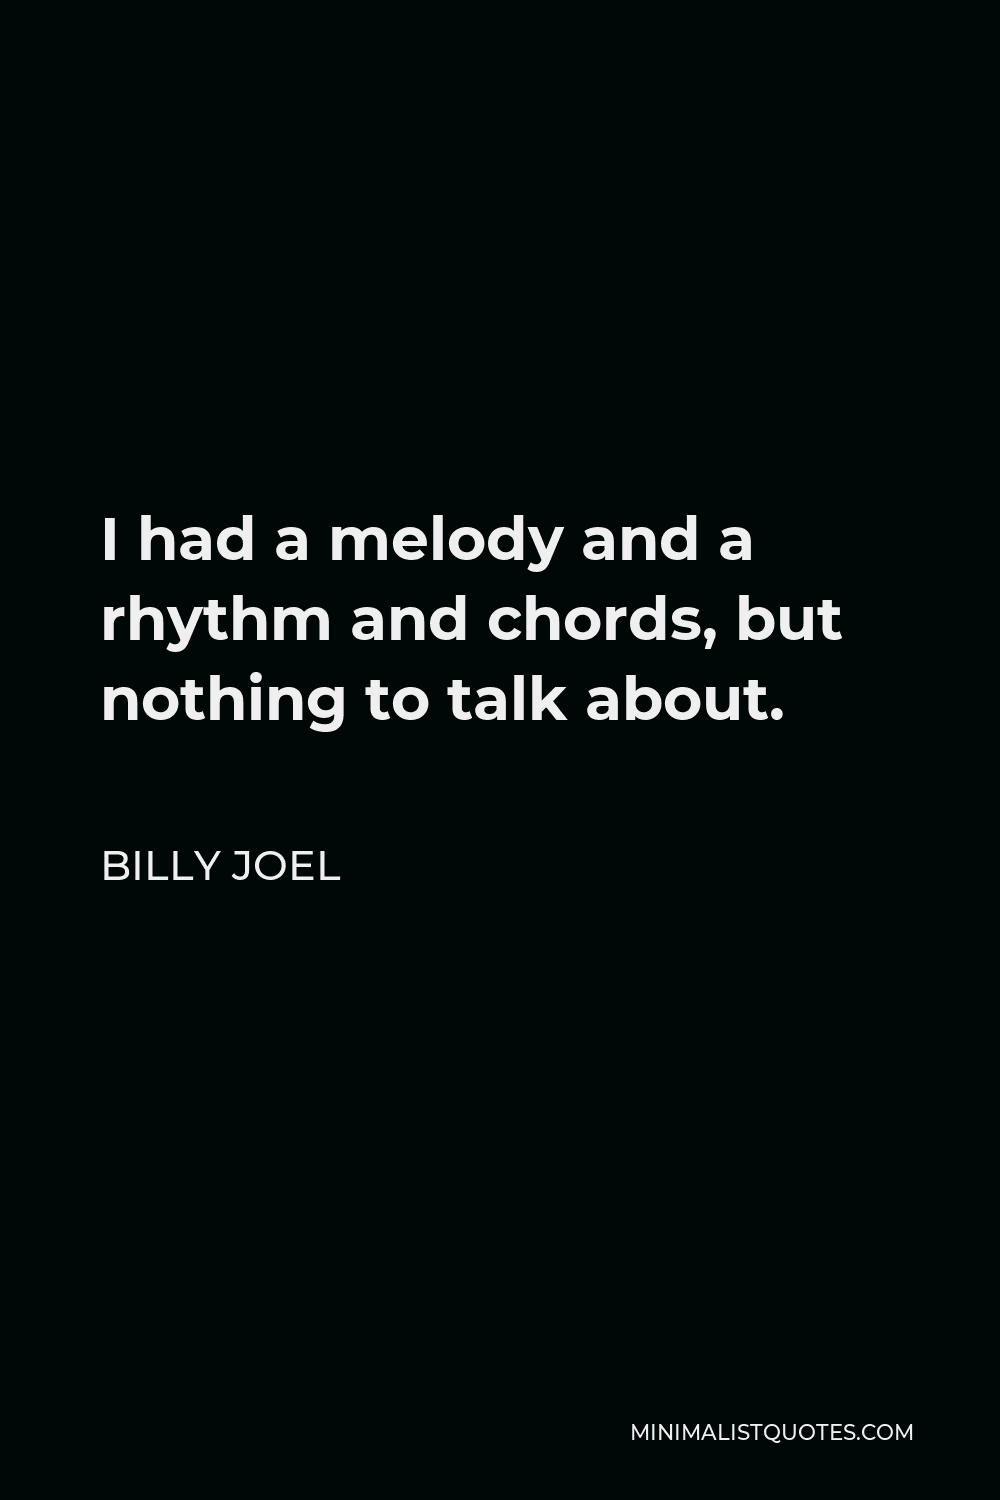 Billy Joel Quote - I had a melody and a rhythm and chords, but nothing to talk about.